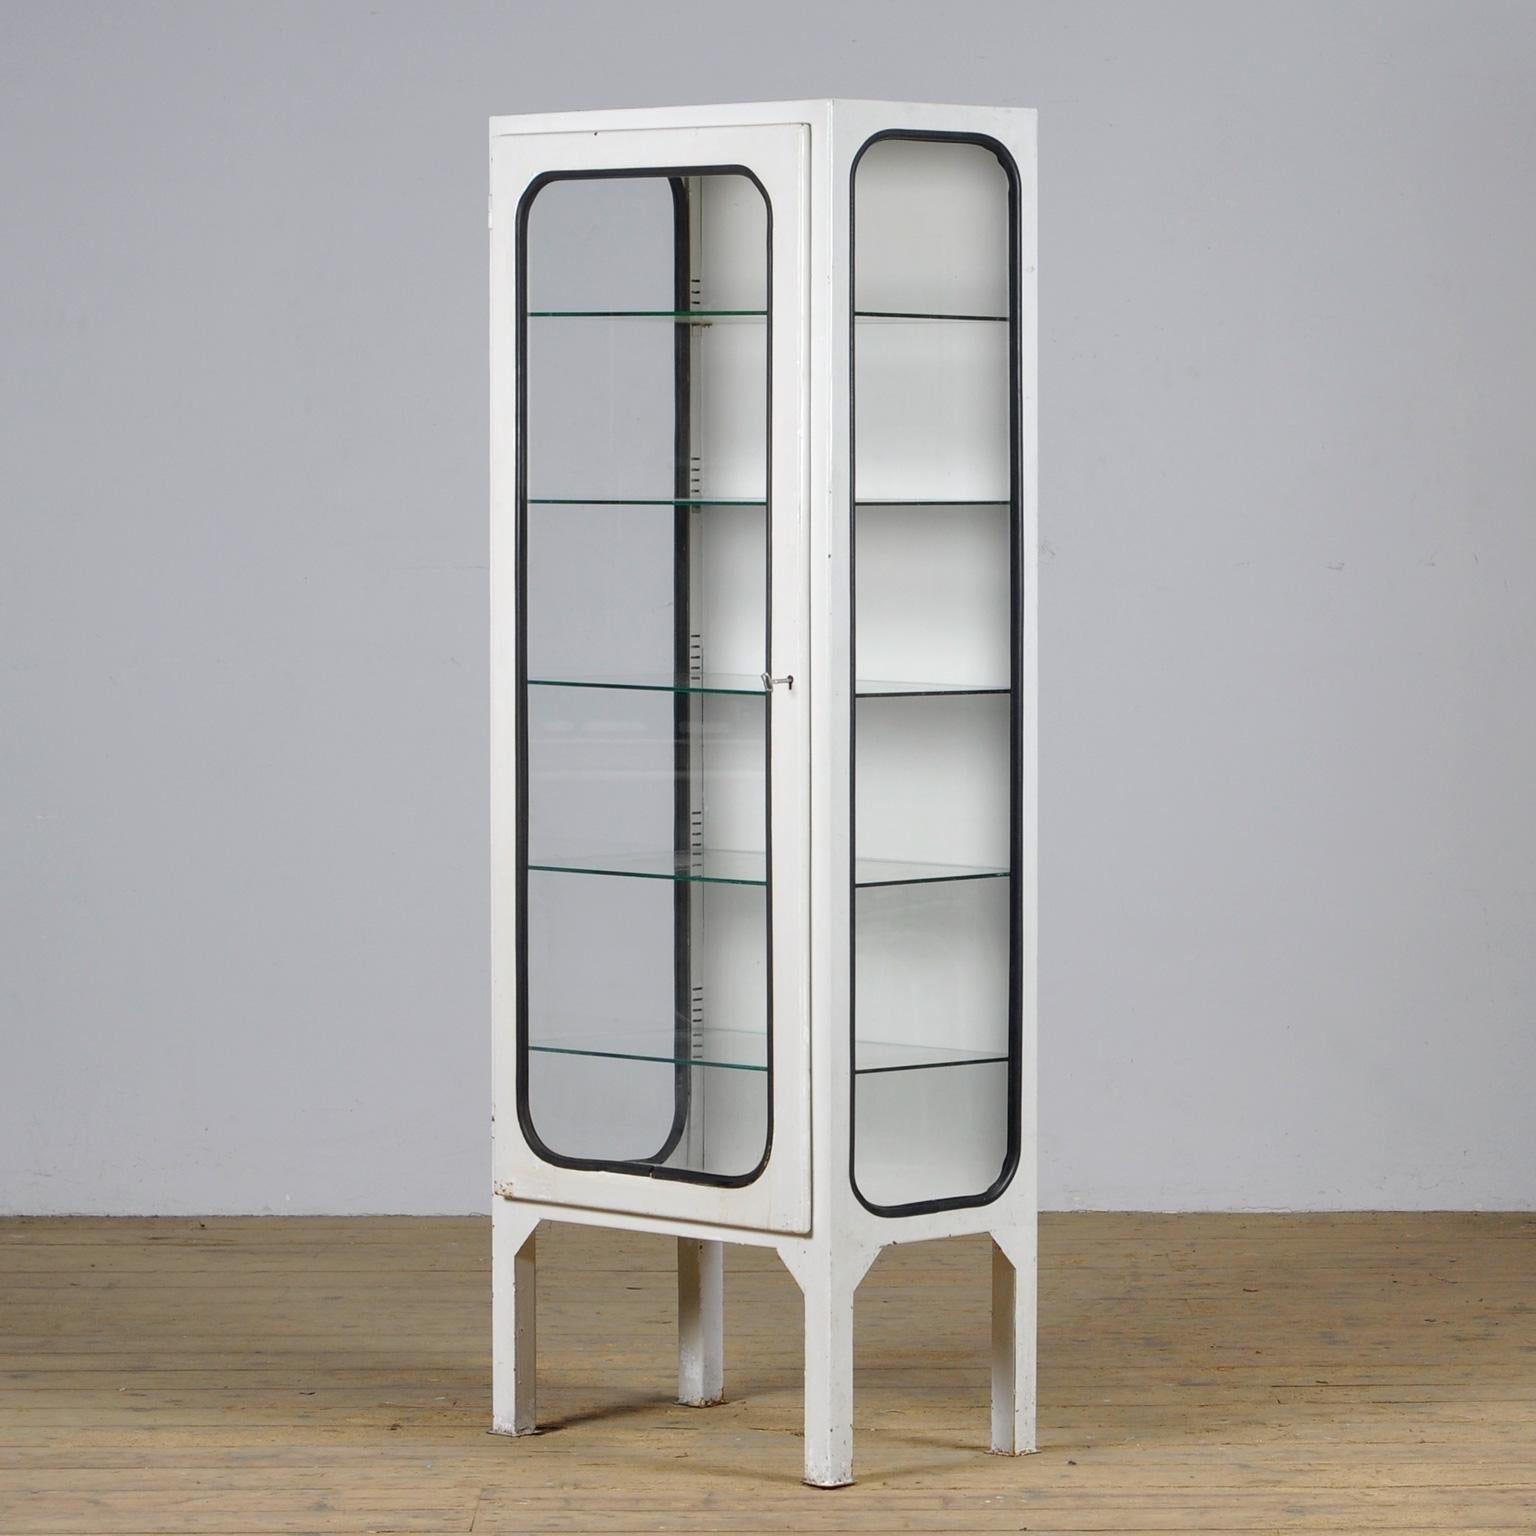 Hungarian Vintage Iron And Glass Medical Cabinet, 1970s For Sale